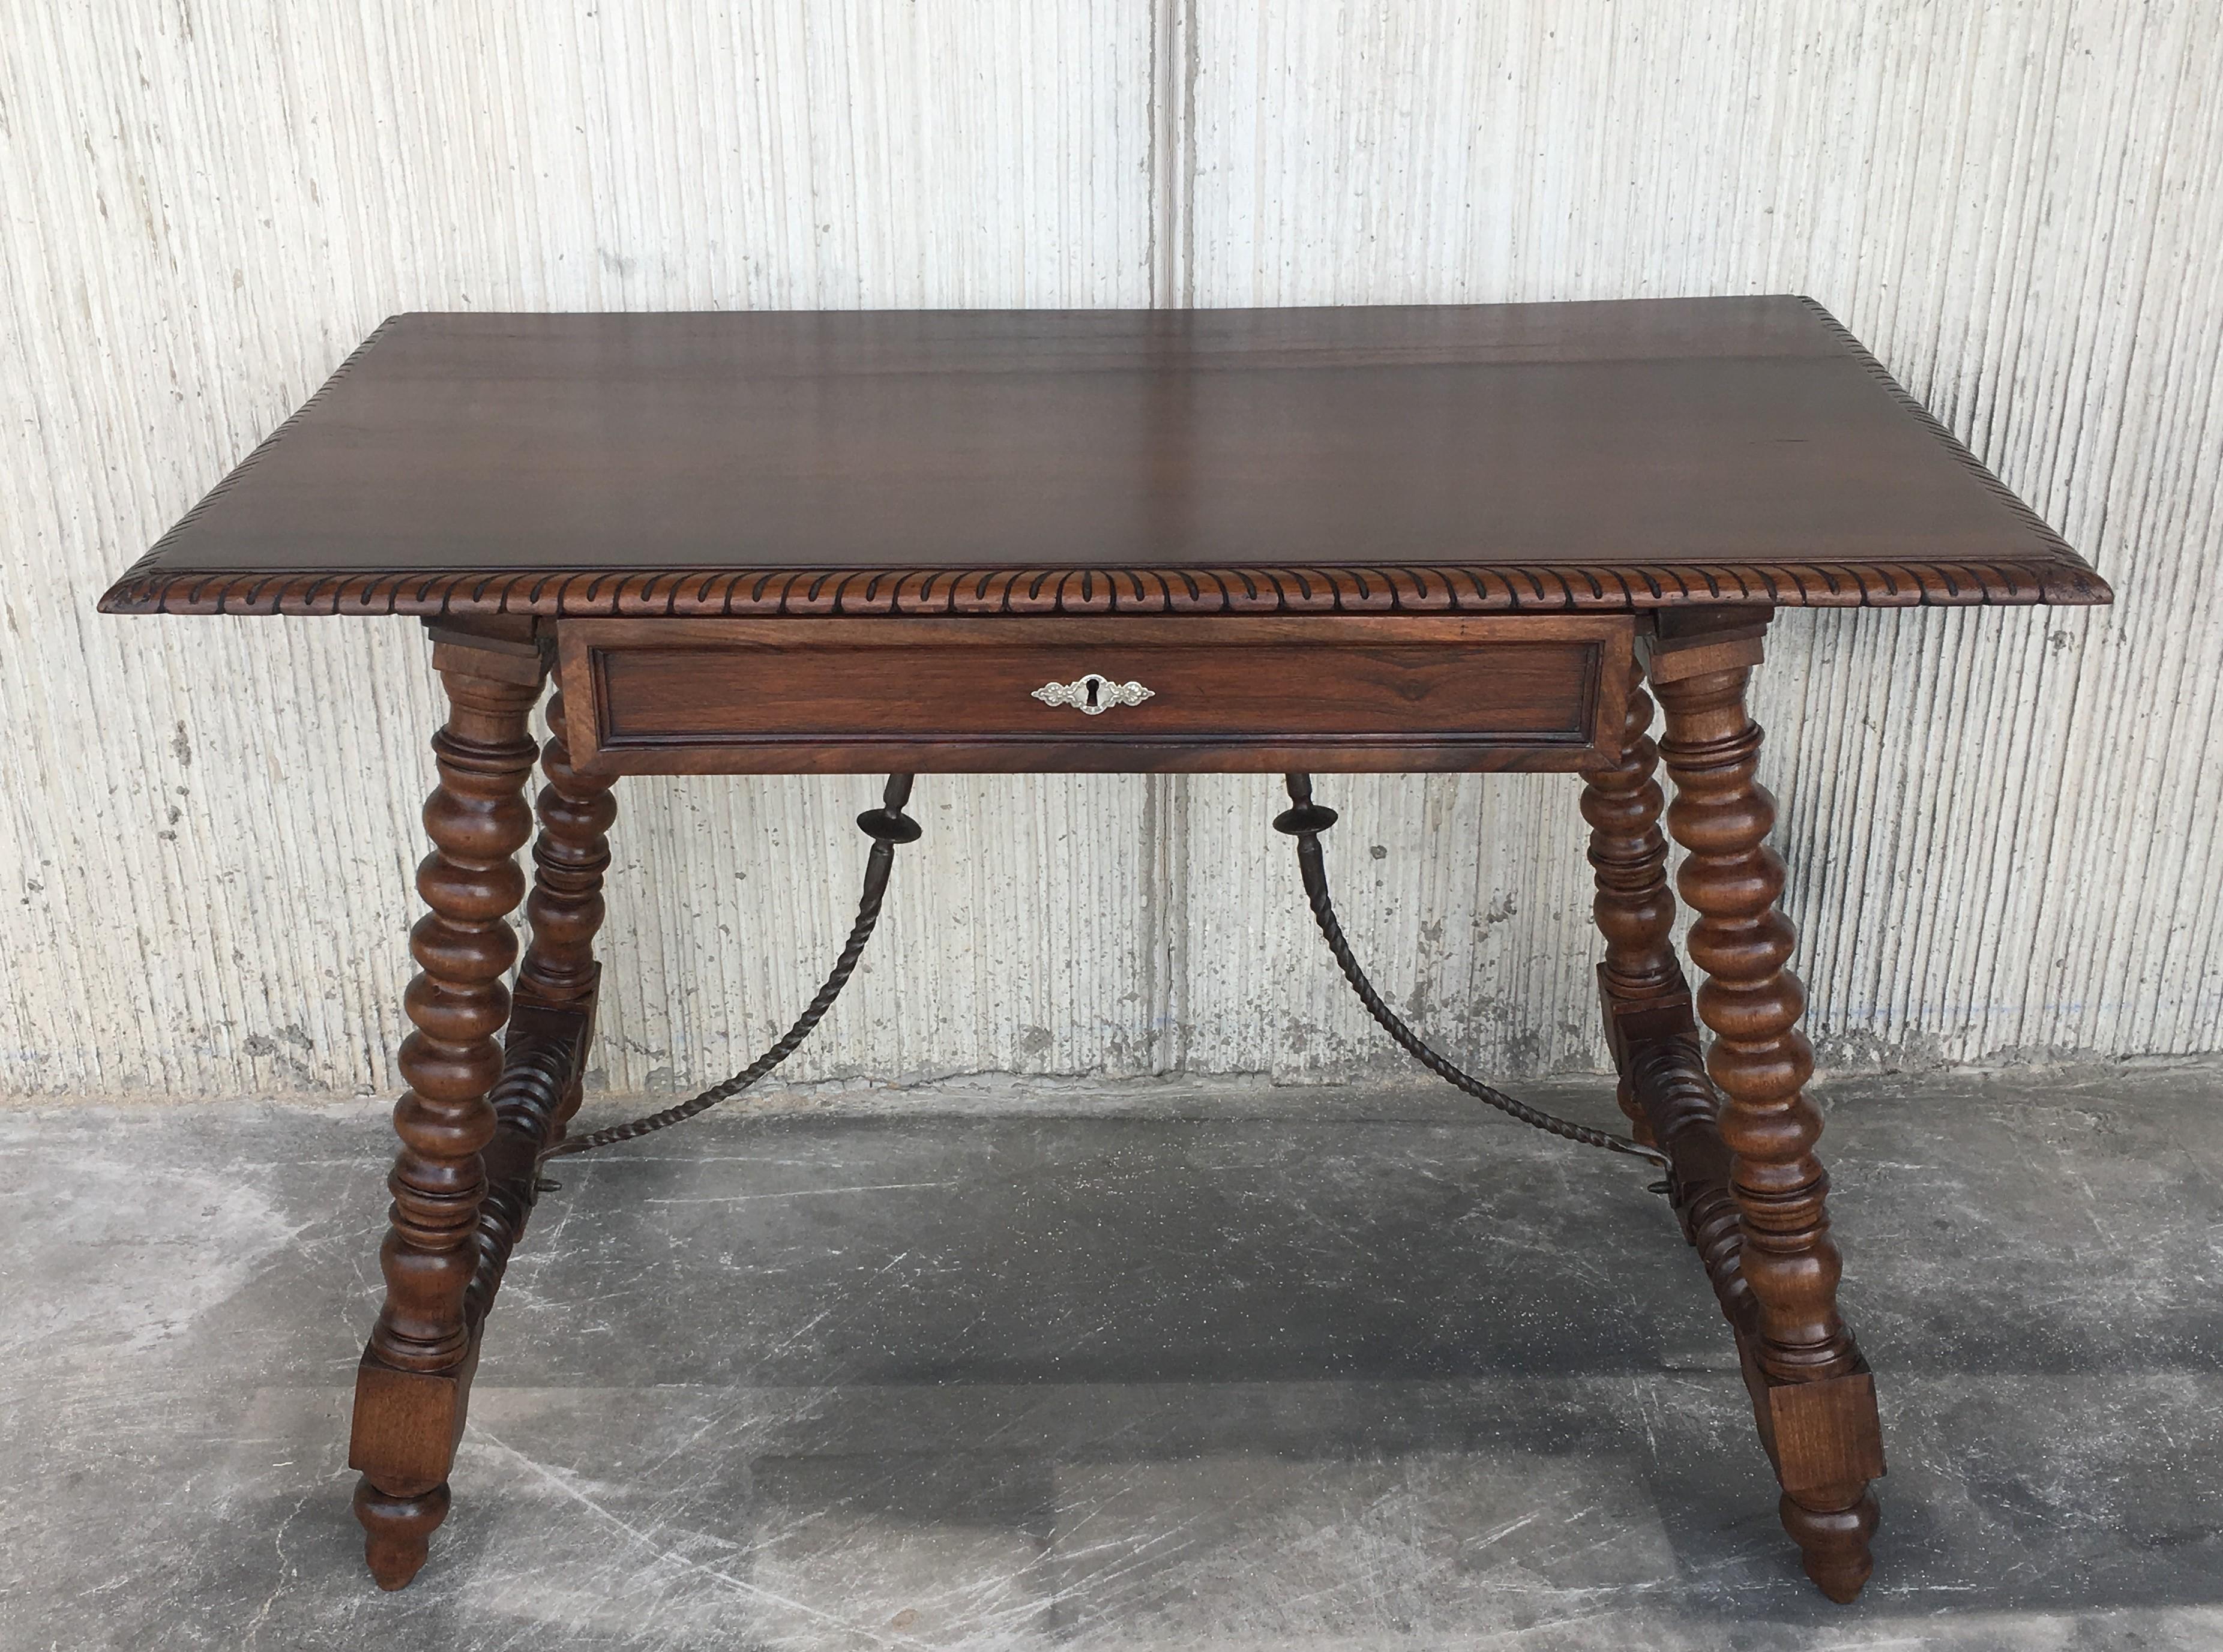 18th Spanish Revival Refectory Desk Table with One Drawer (Barock)